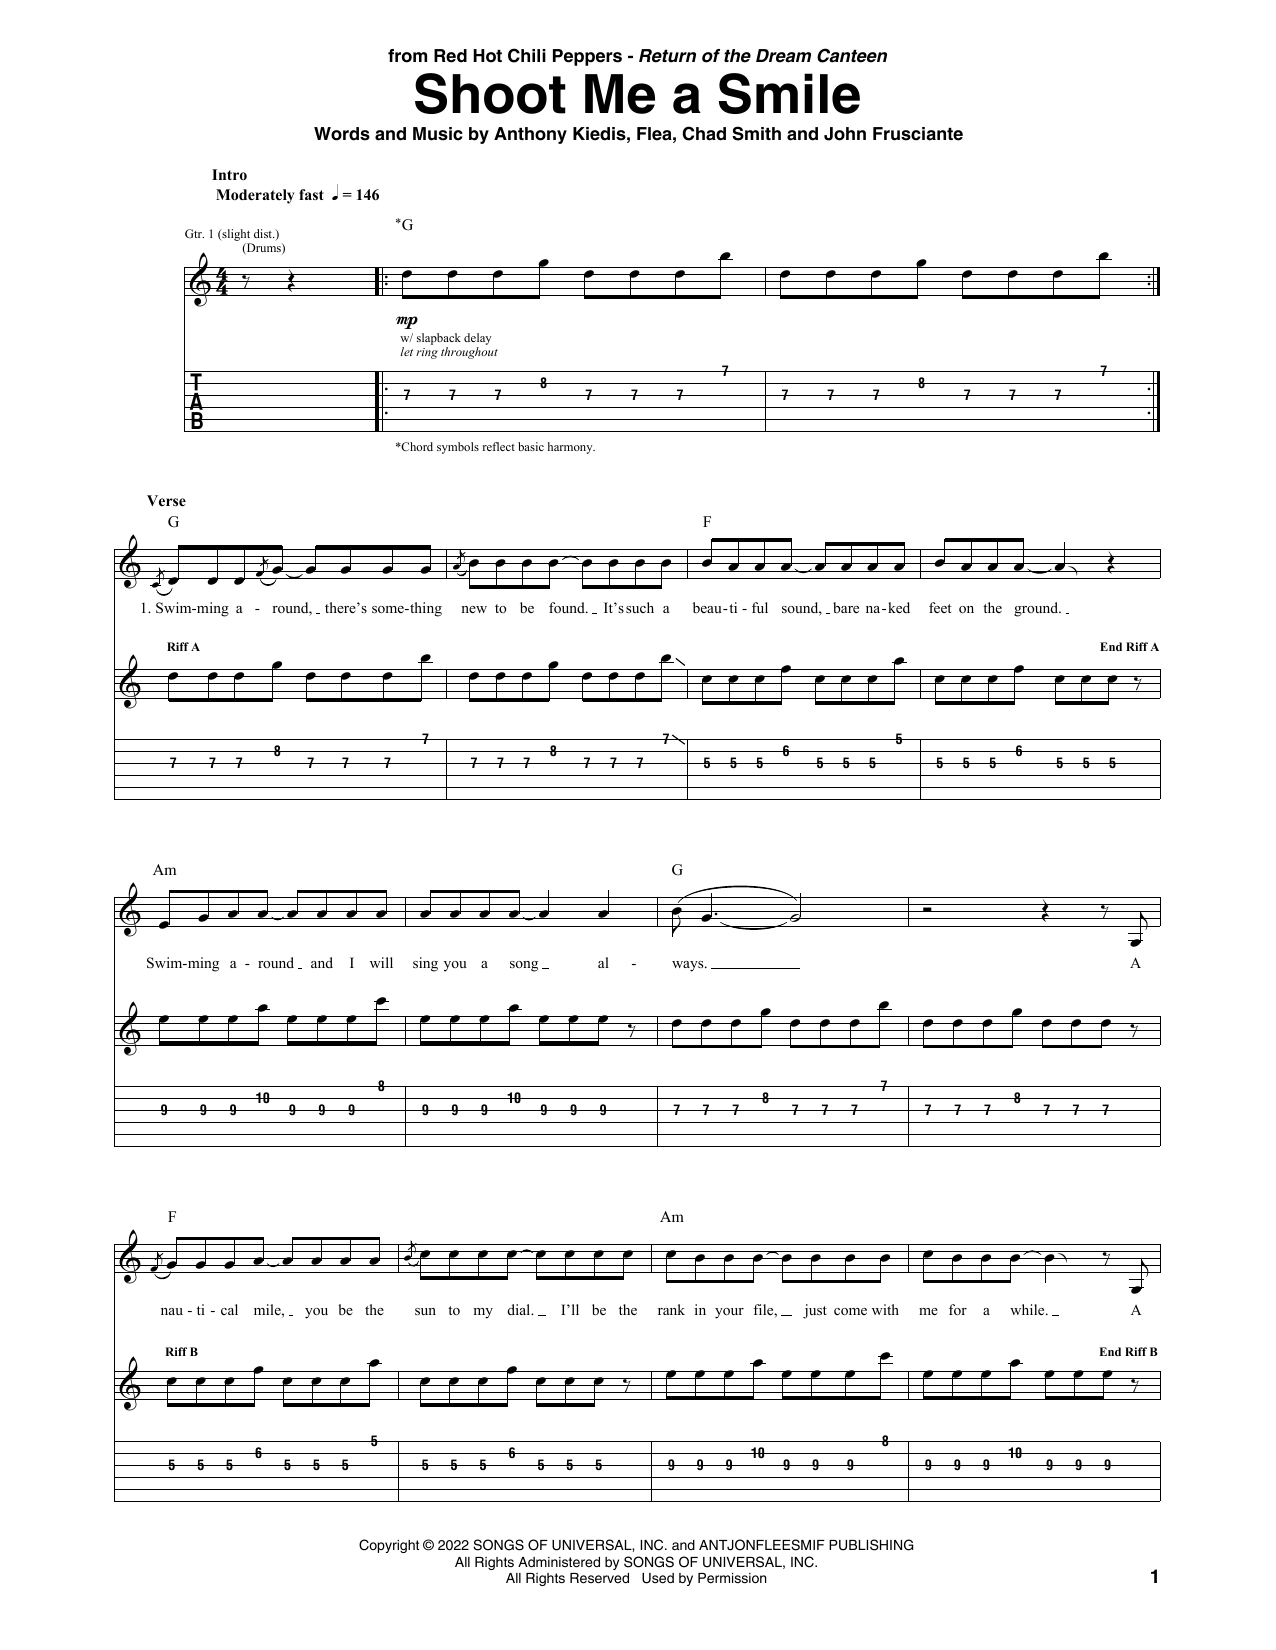 Download Red Hot Chili Peppers Shoot Me A Smile Sheet Music